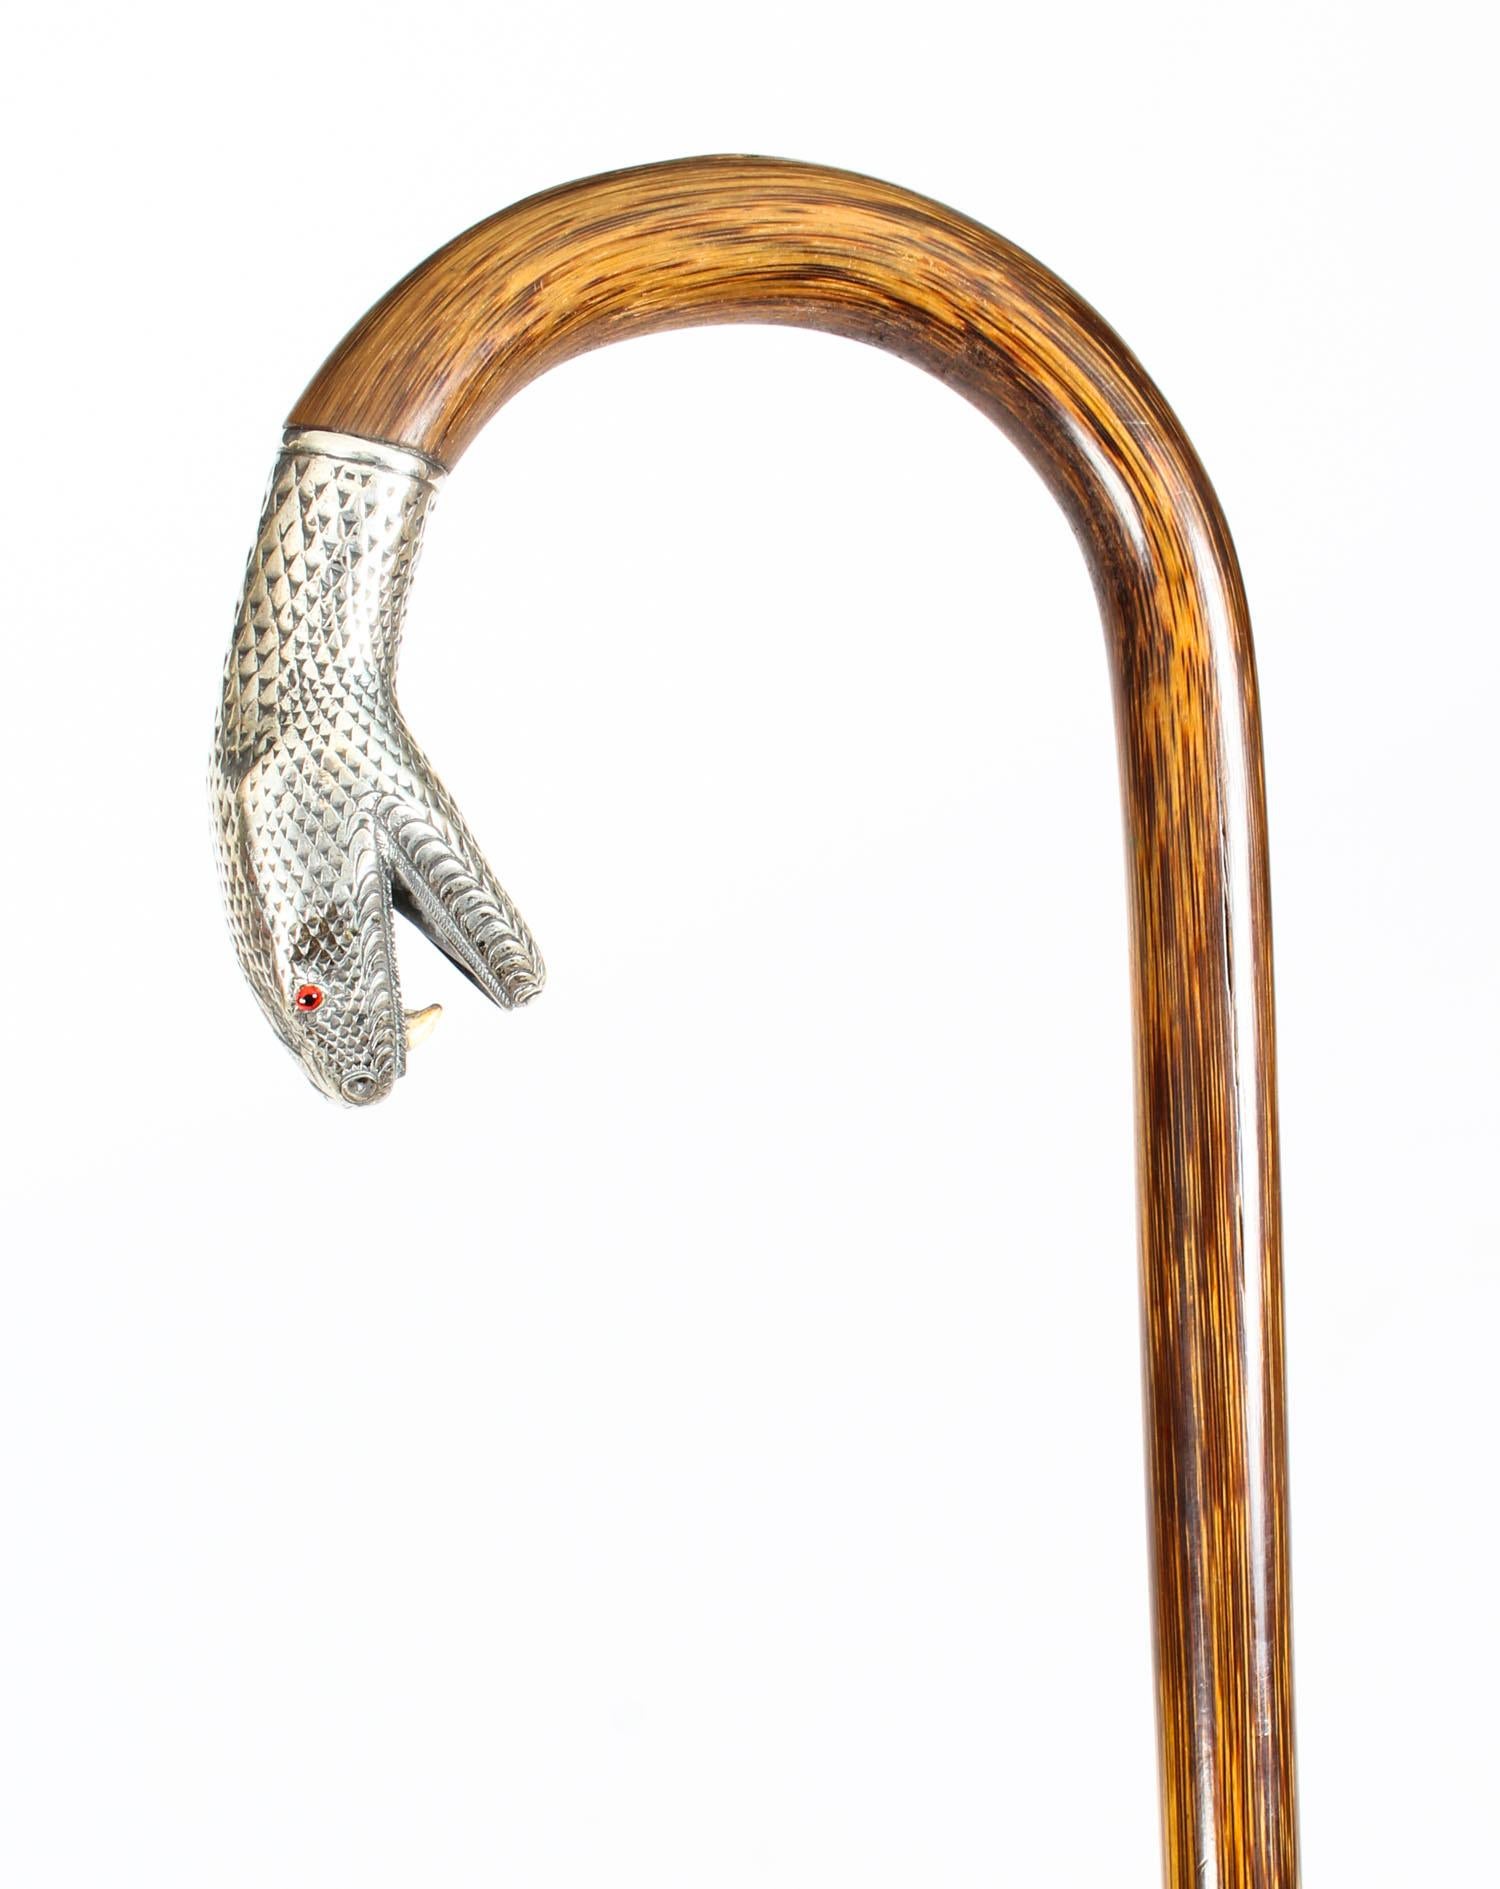 Antique Walking Stick Cane with Silver Snake's Head, 19th Century 1